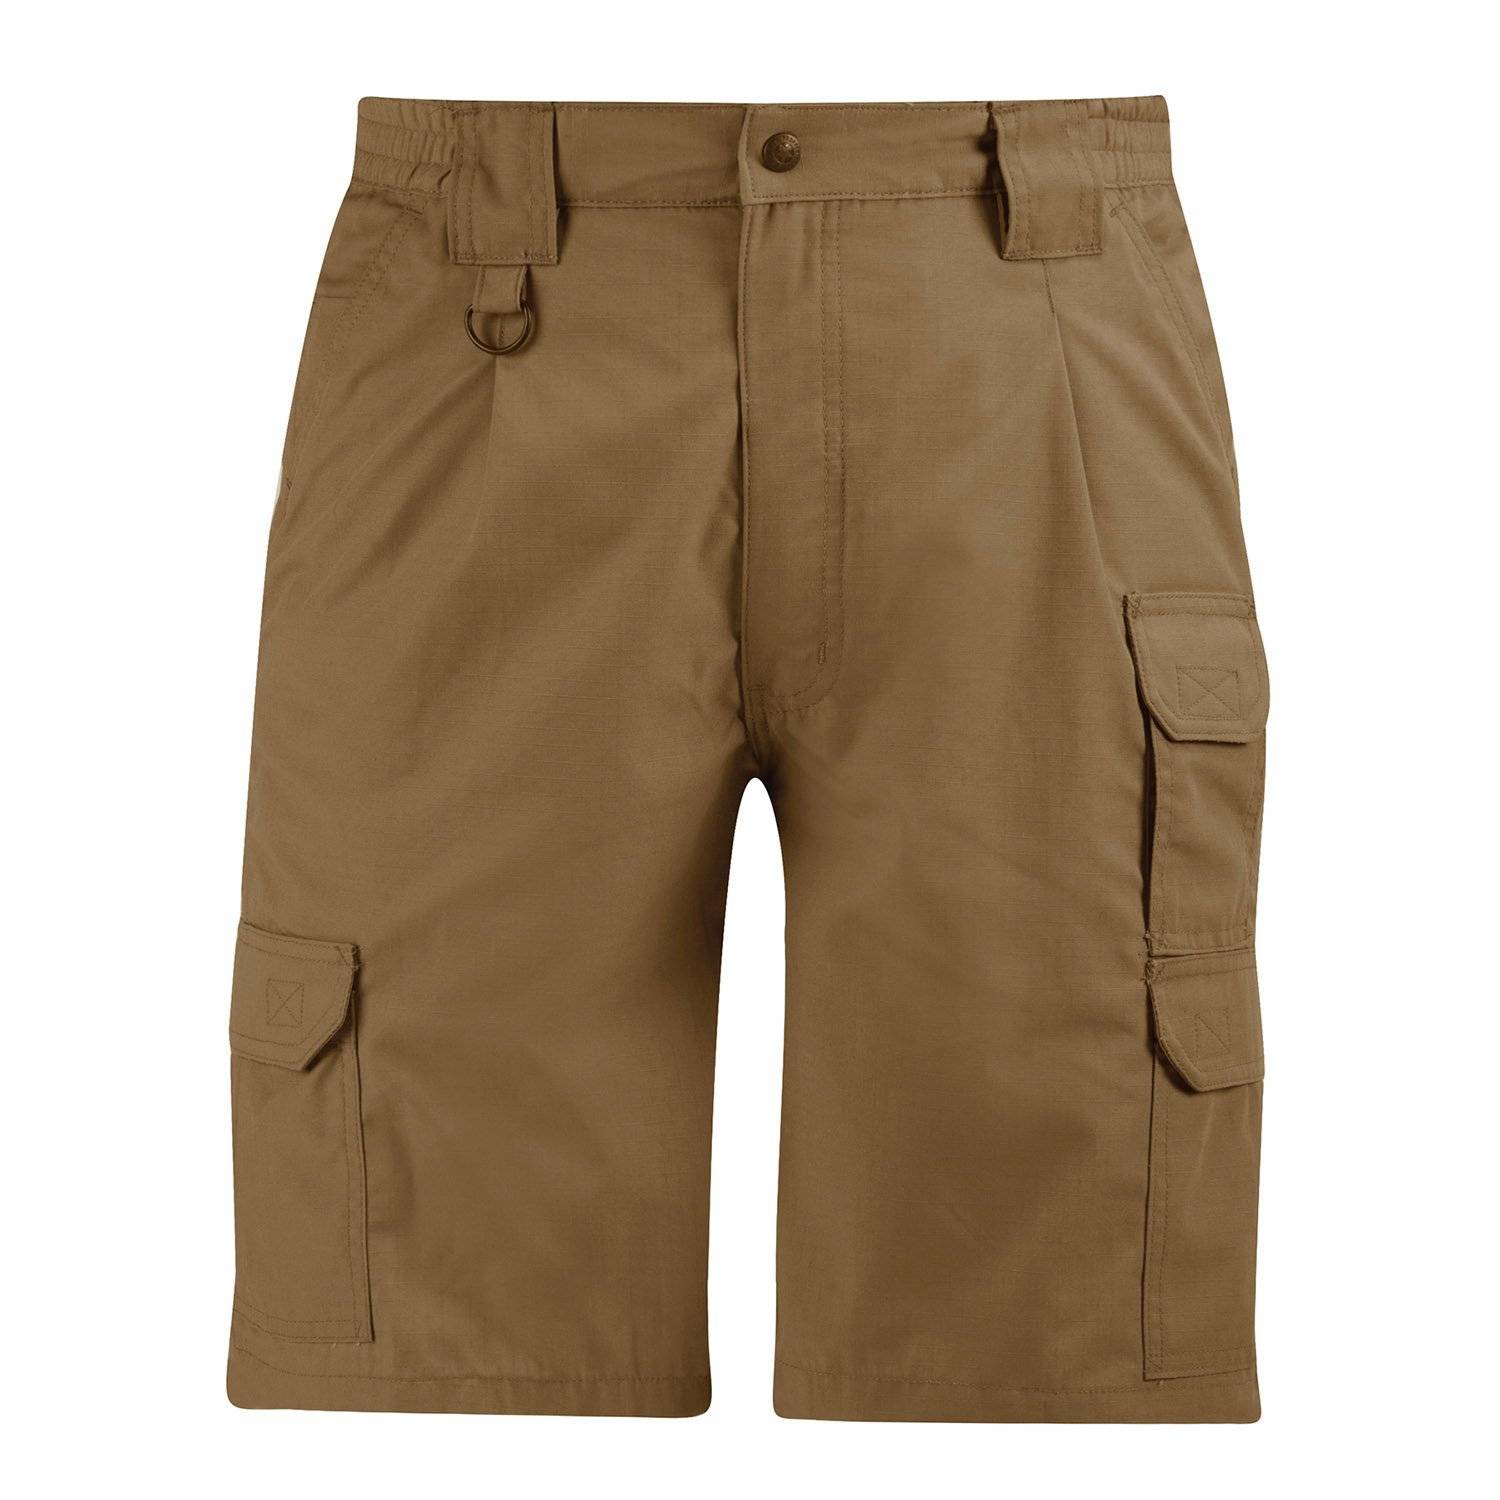 Propper Stain Resistant Tactical Shorts